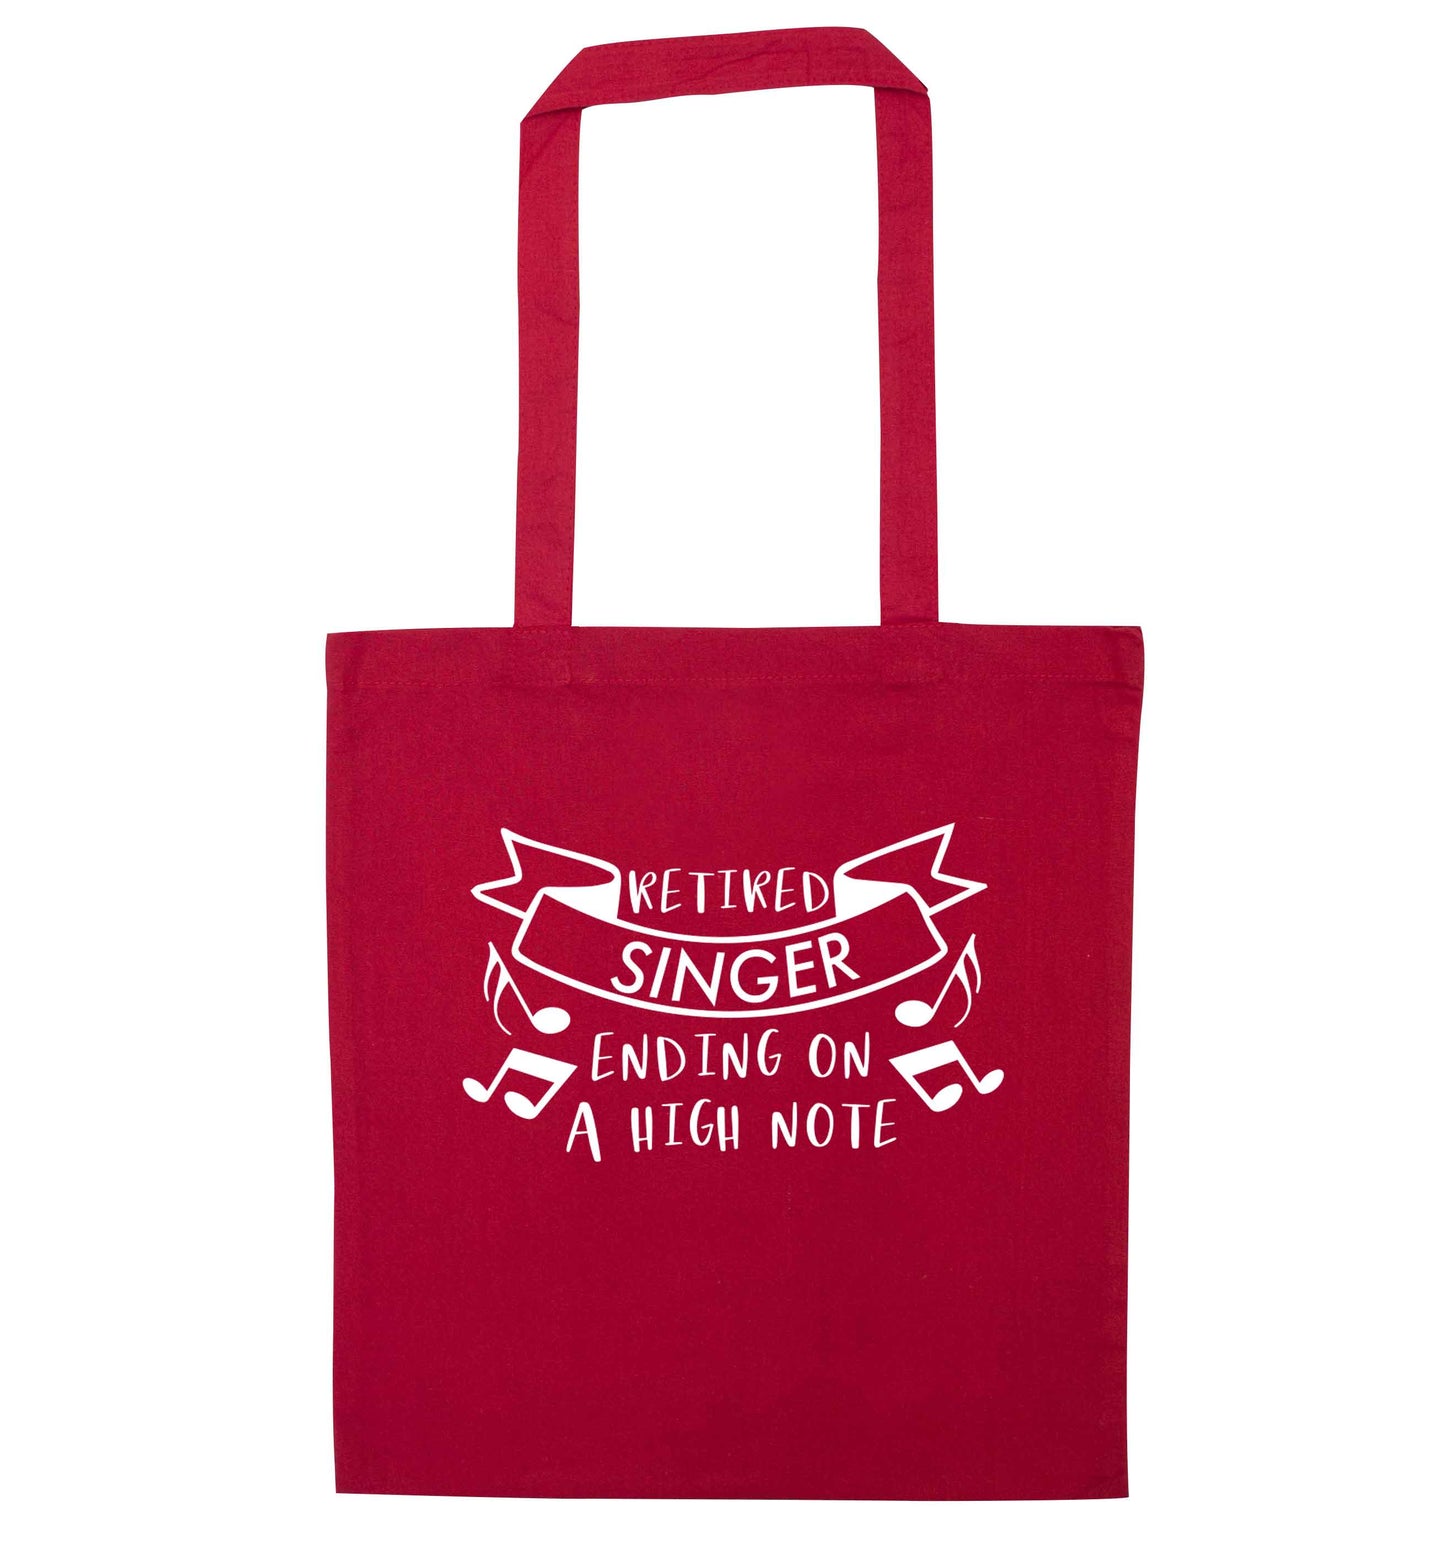 Retired singer ending on a high note red tote bag